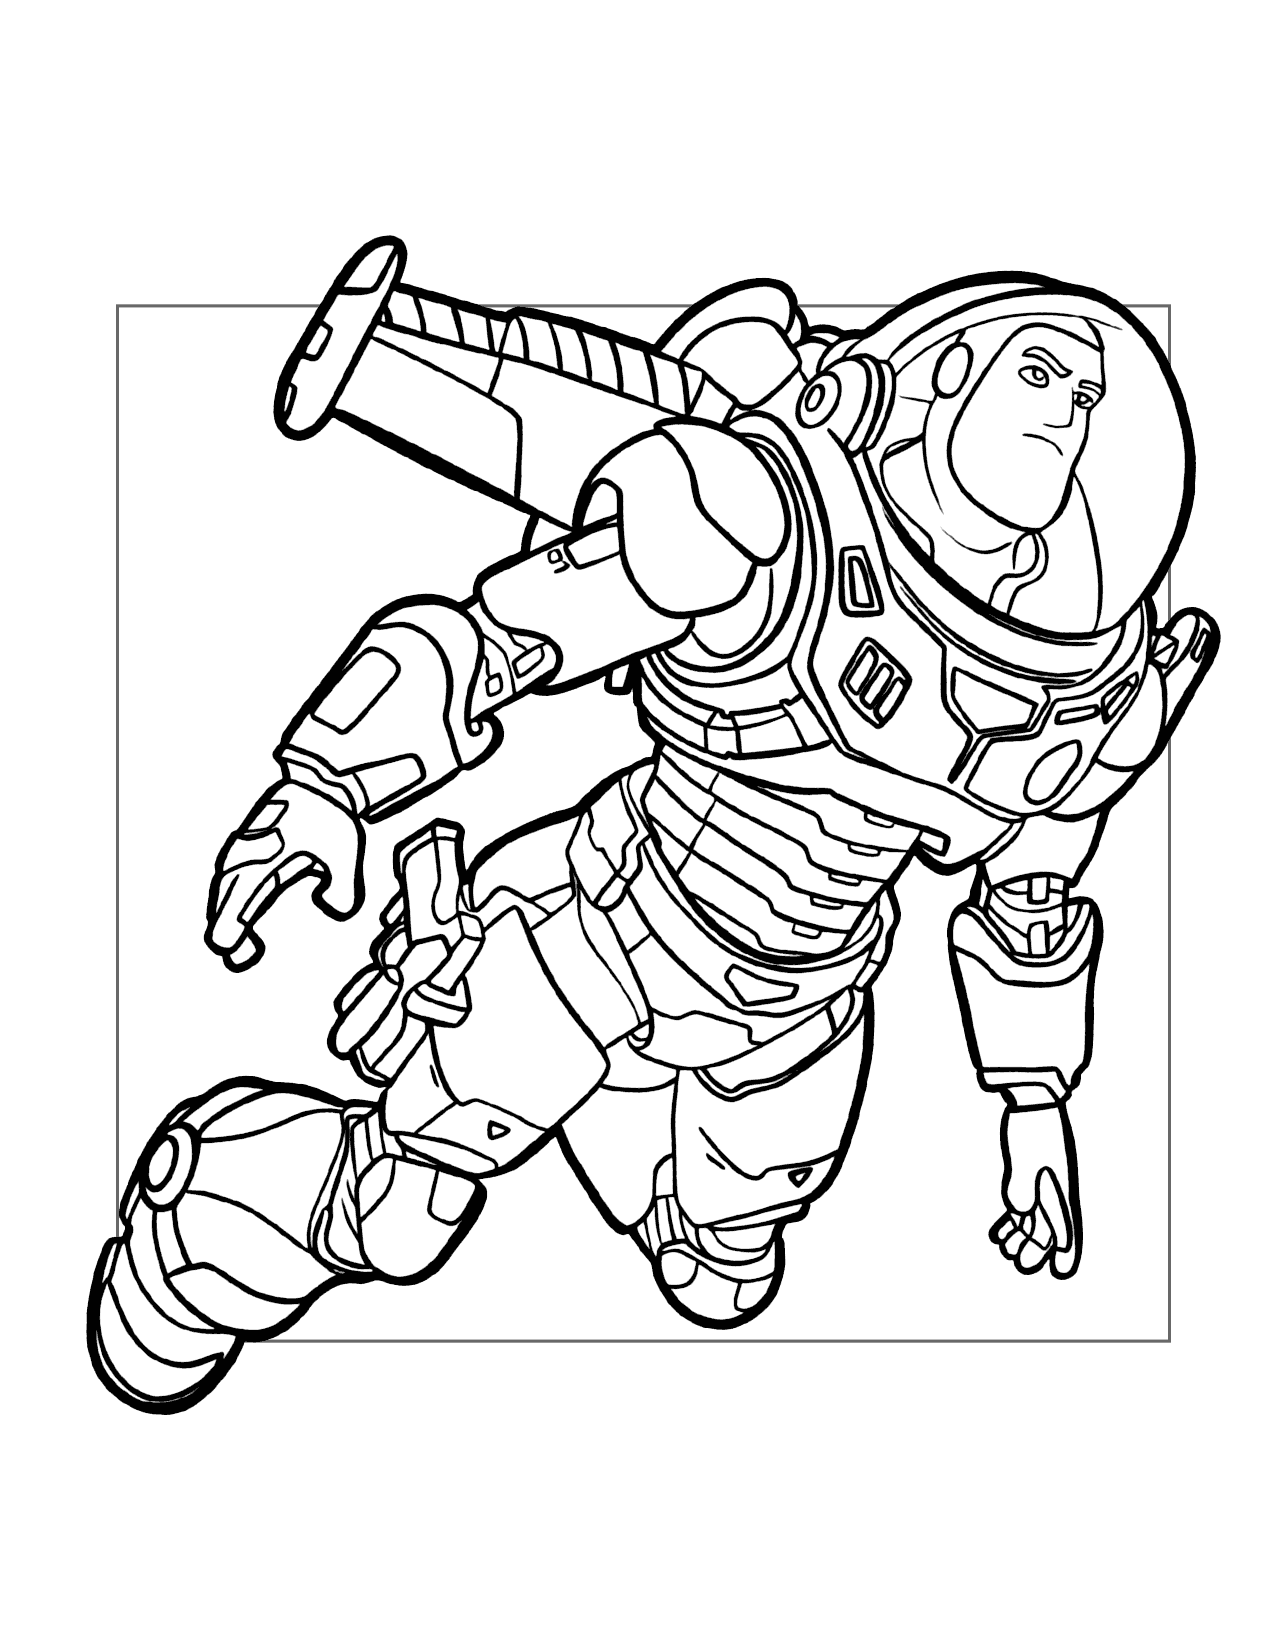 Buzz Lightyear Flies In The Movie Coloring Page